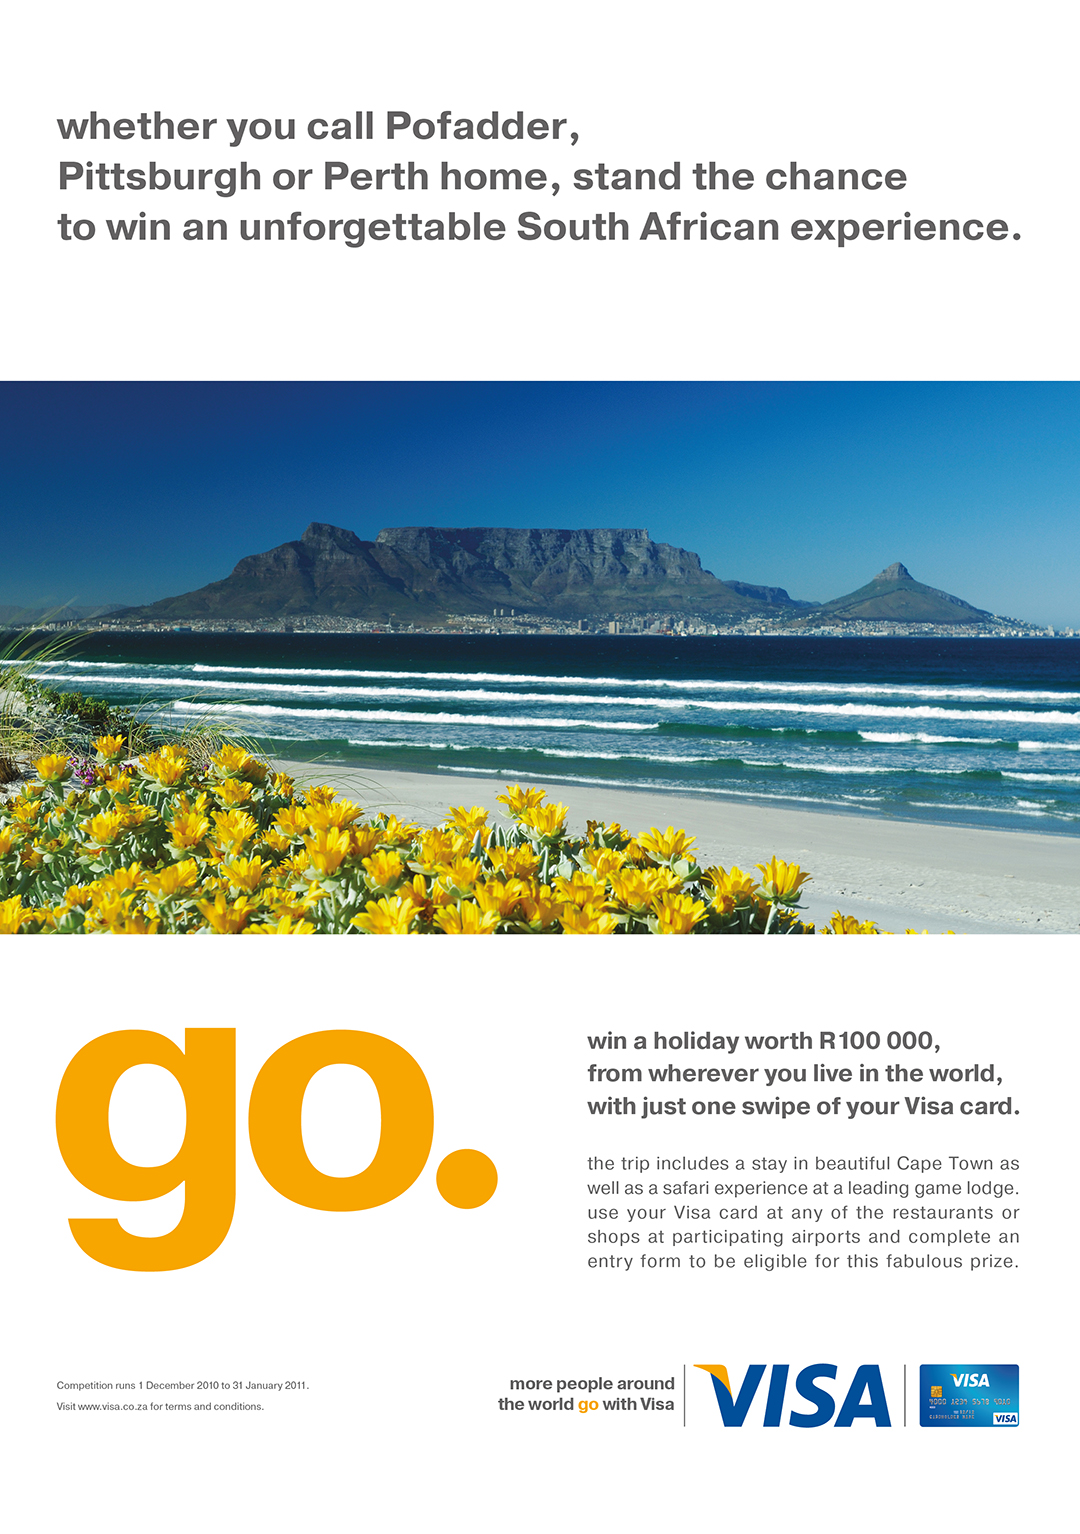 Visa competition: flyer to win a trip within South Africa, image of Table Mountain